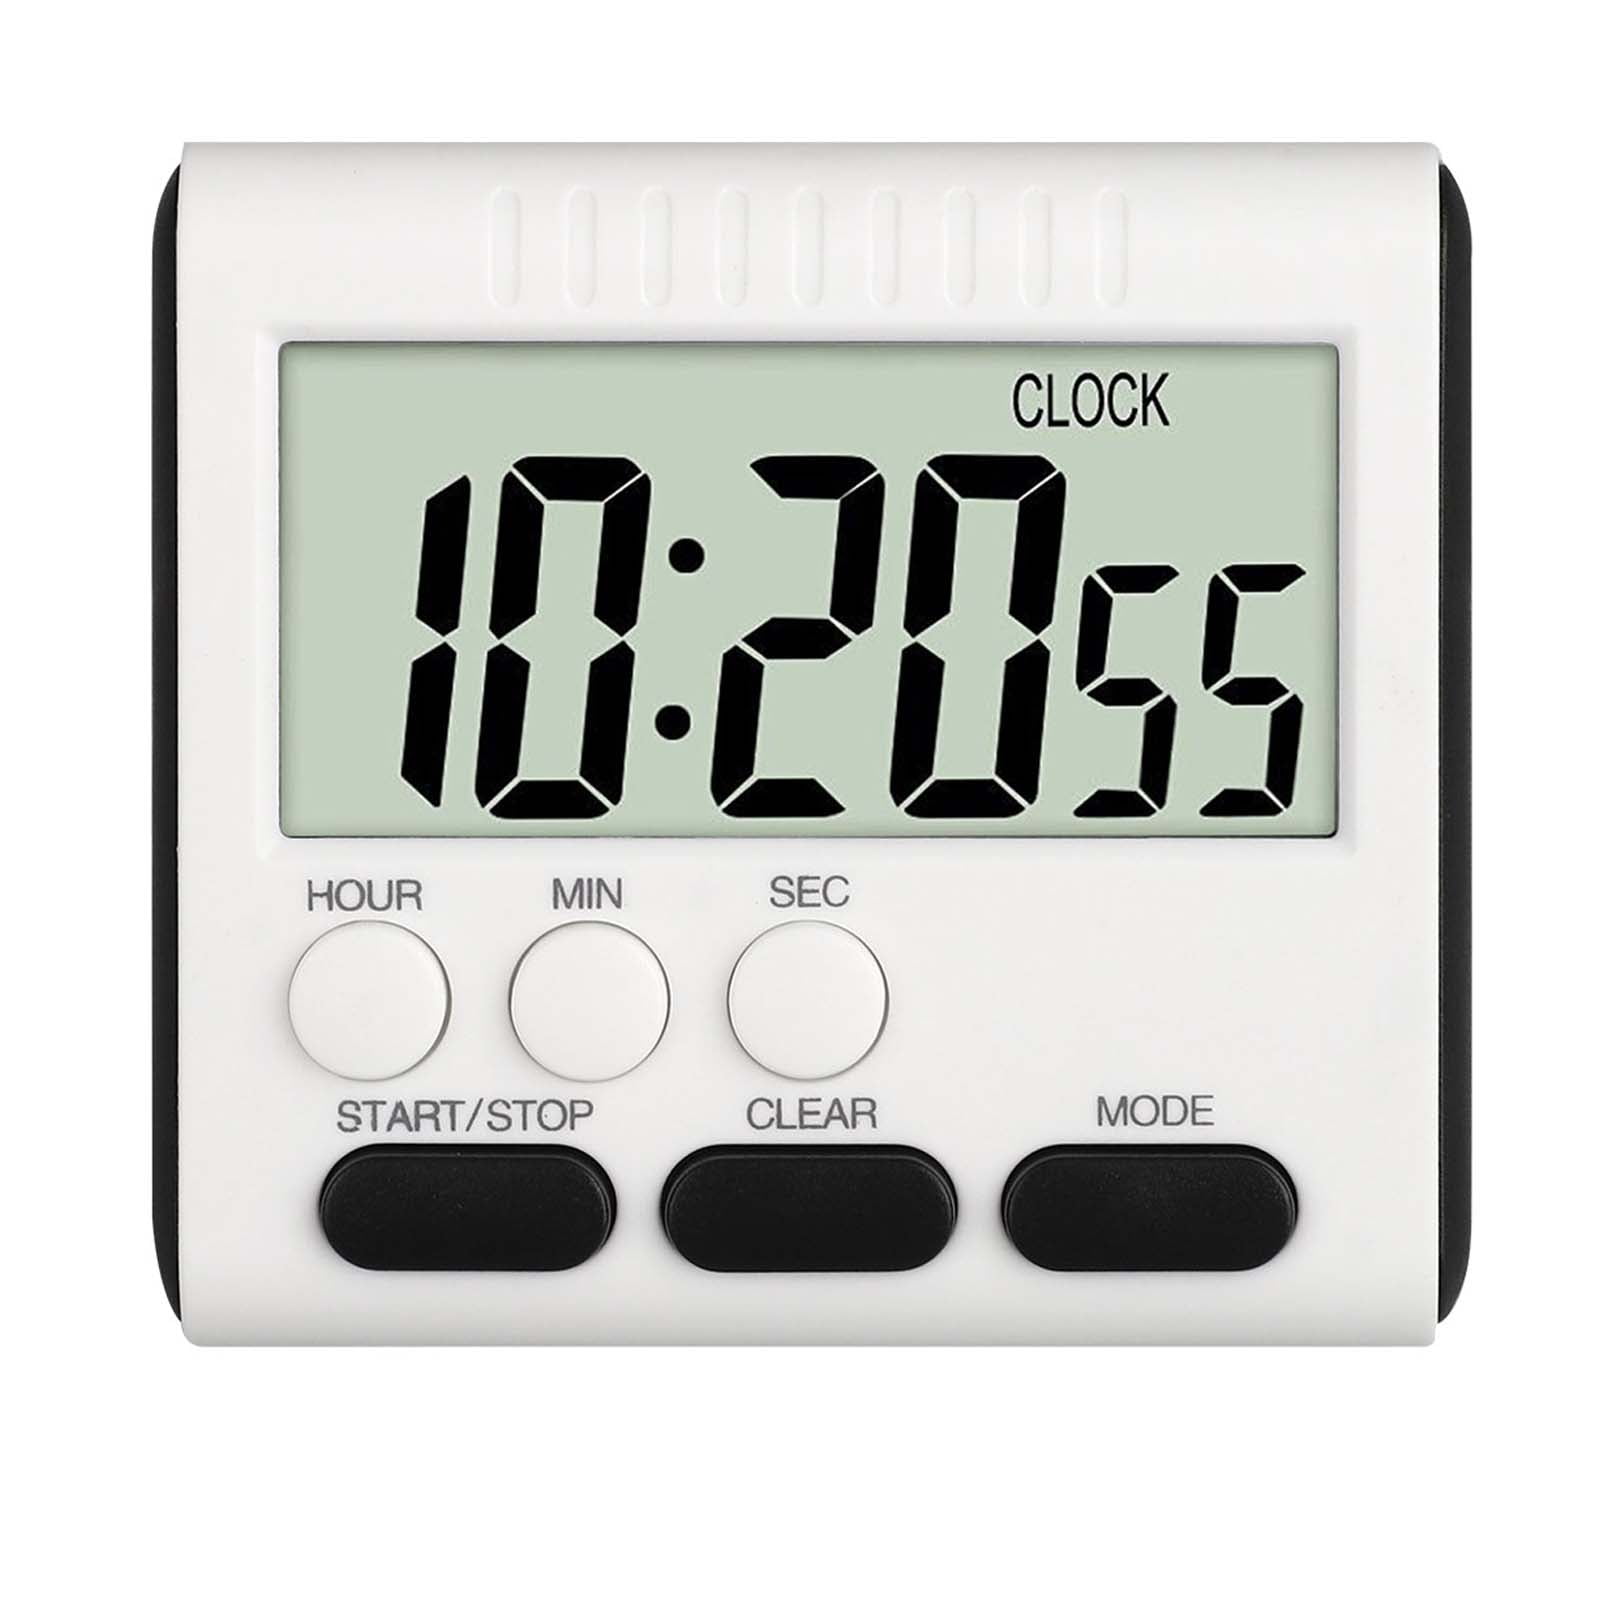 Timer Digital Large LCD Kitchen Cooking Count Down Up Clock 99 Minute Alarm 